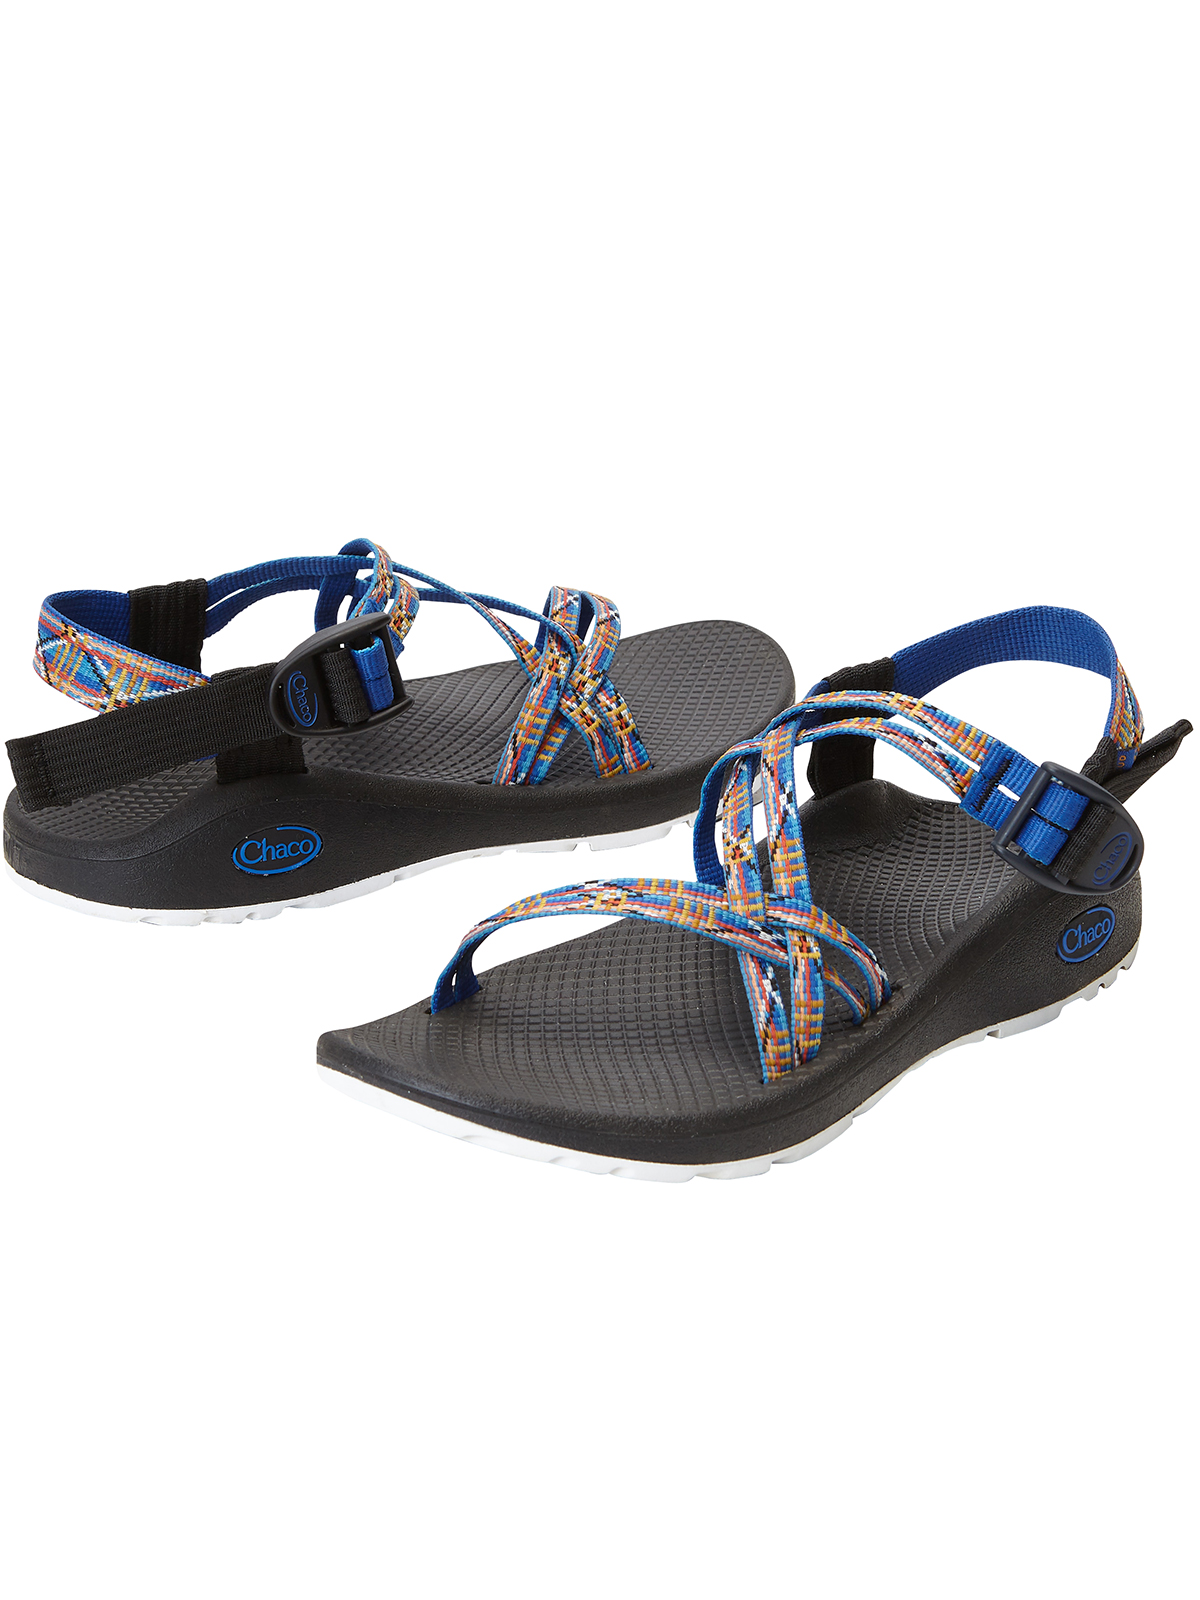 girls chacos size 1